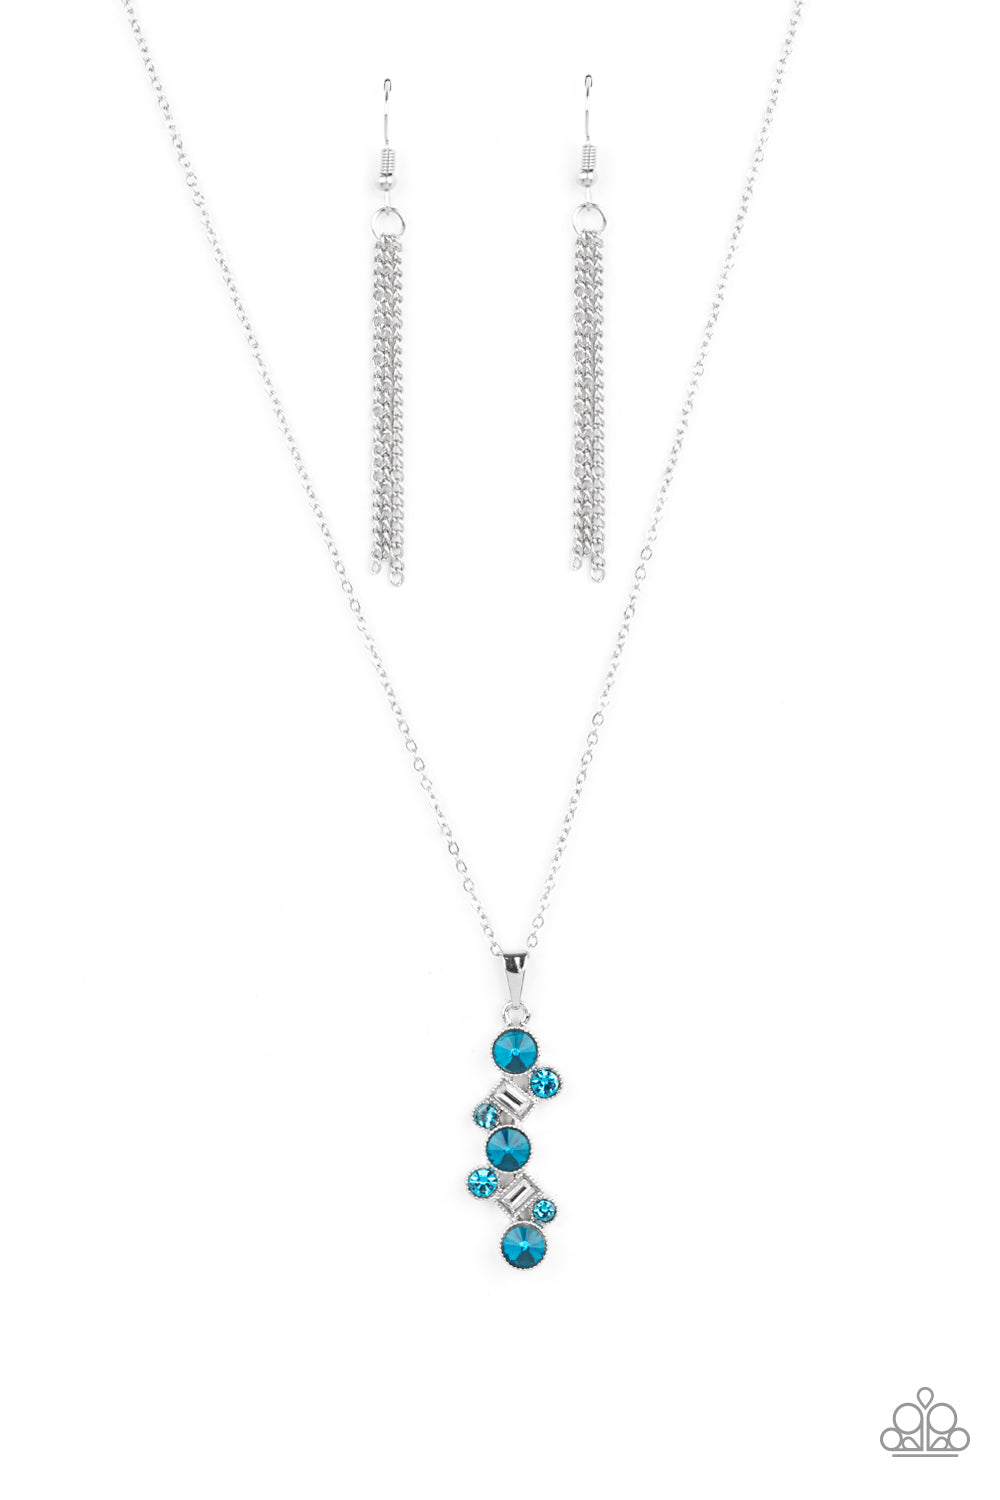 Classically Clustered - blue - Paparazzi necklace